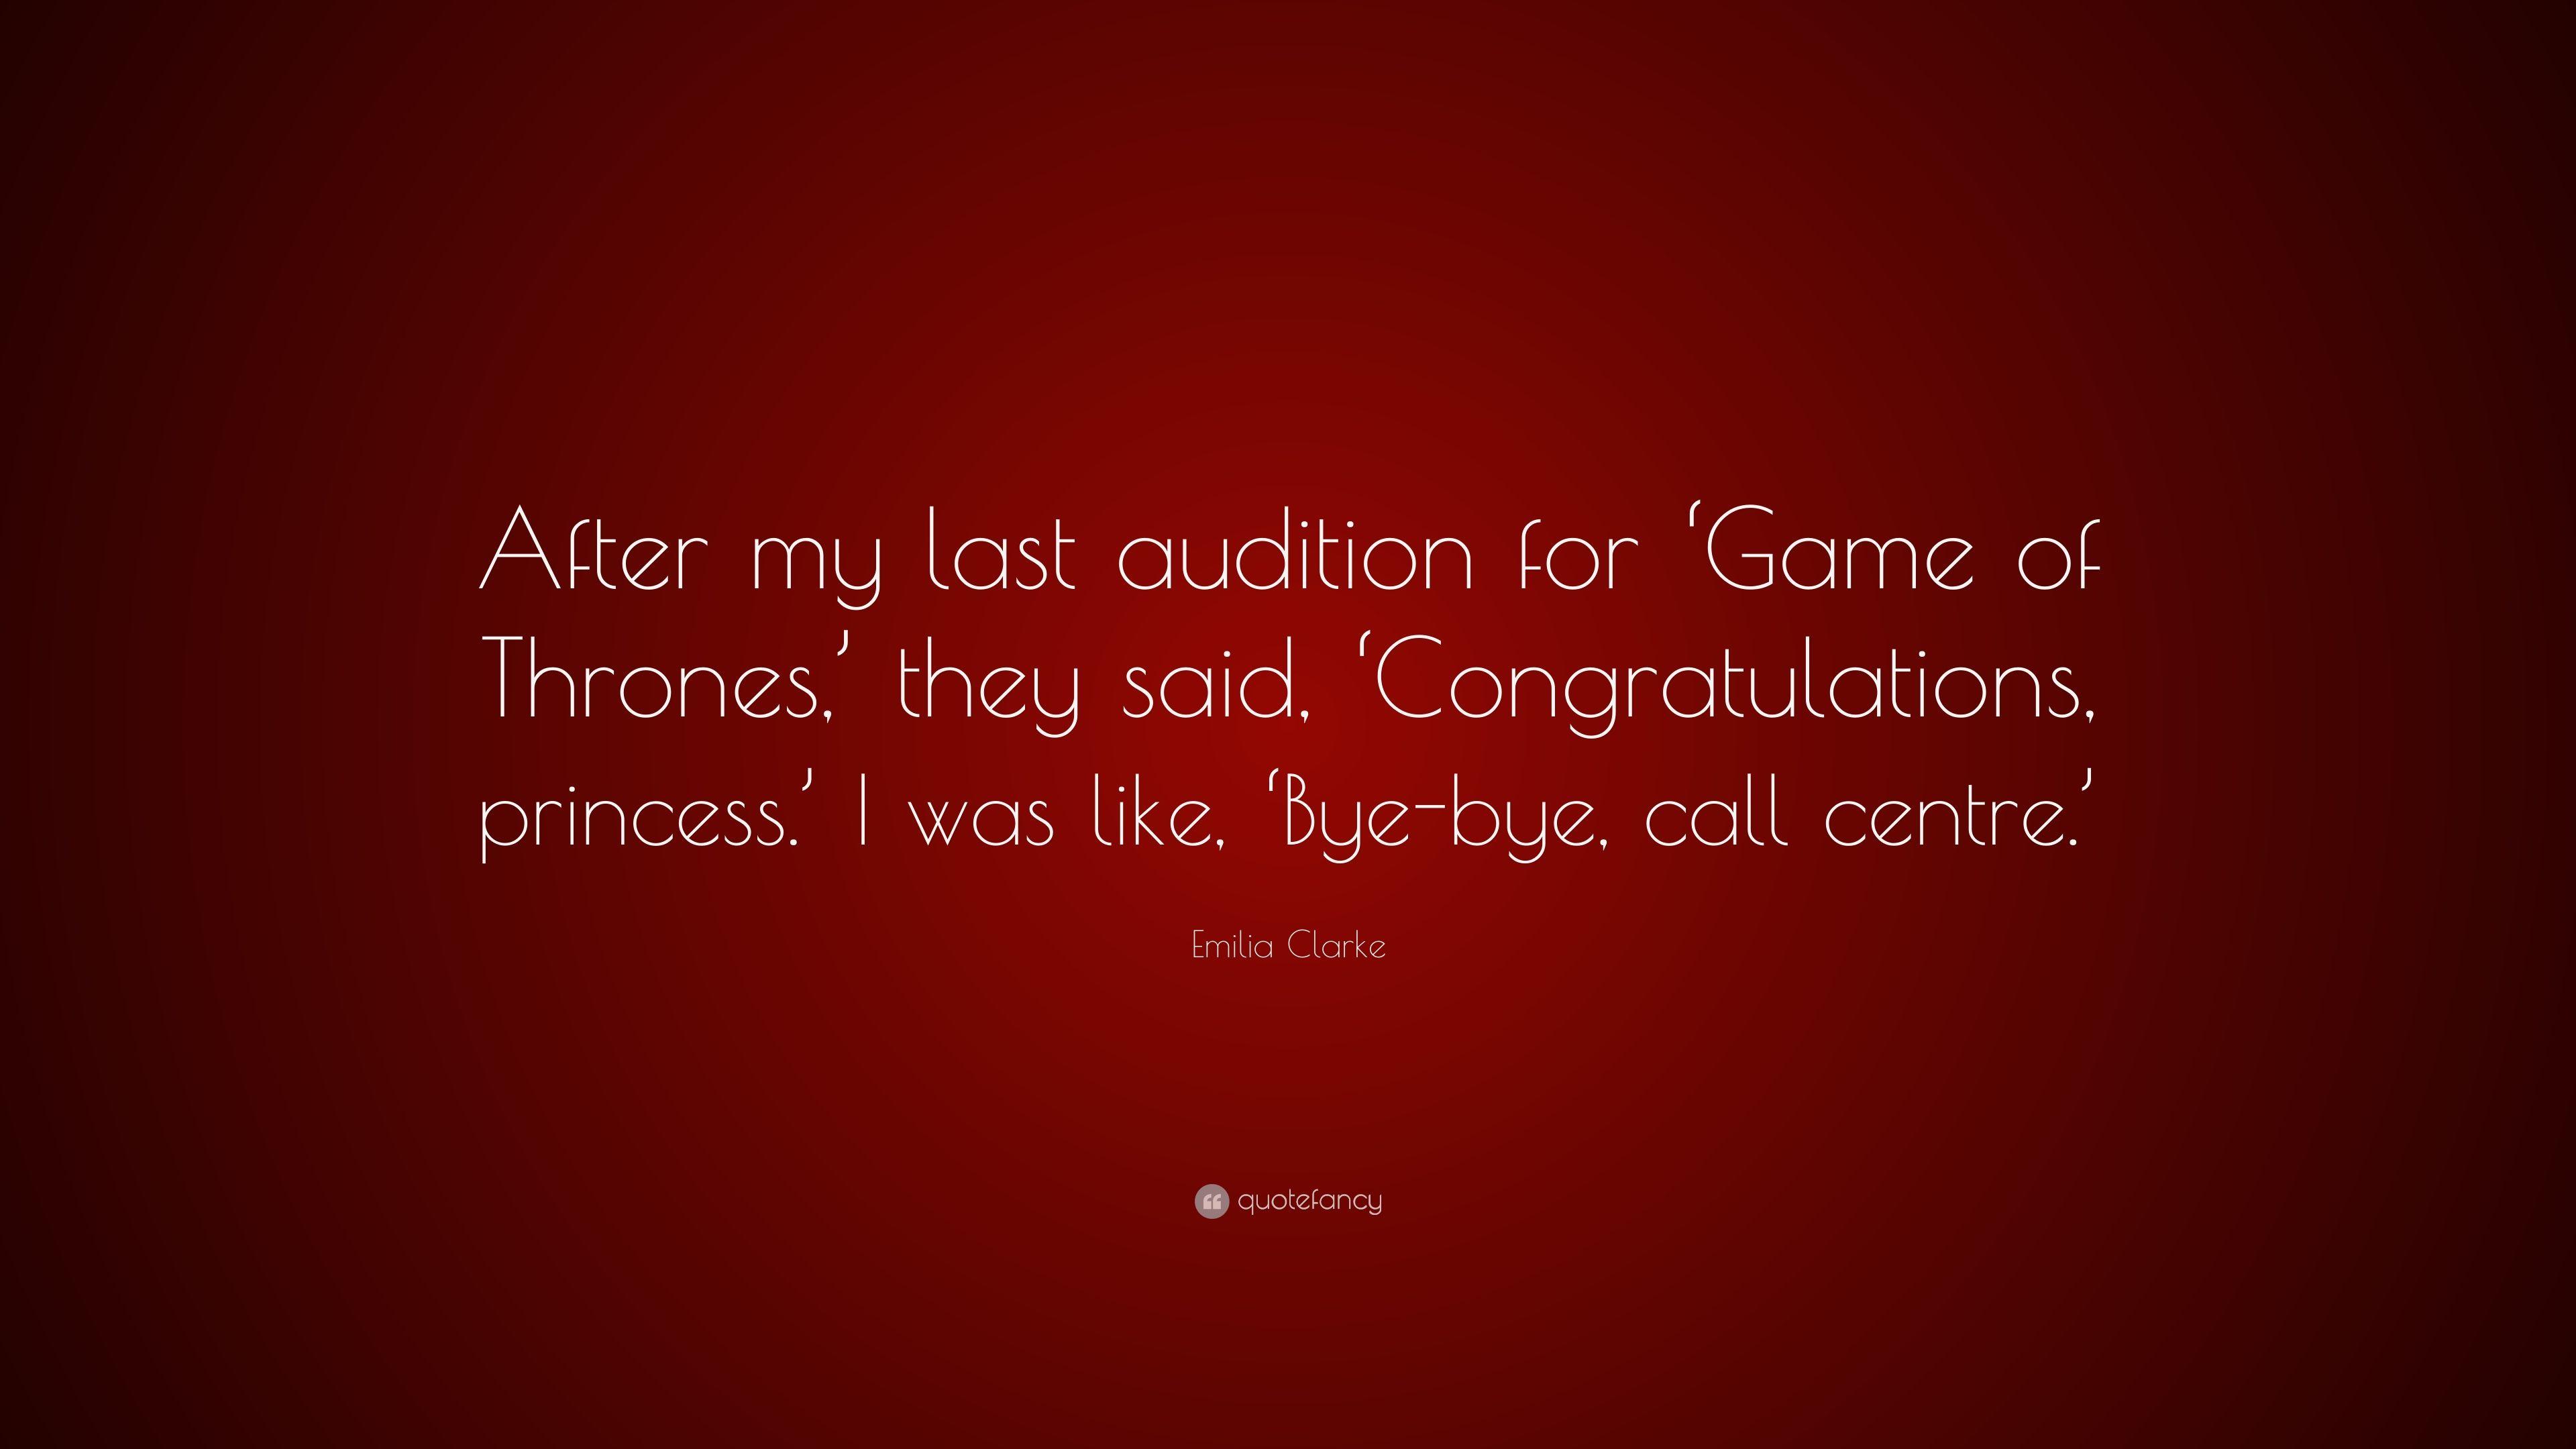 Emilia Clarke Quote: “After my last audition for 'Game of Thrones